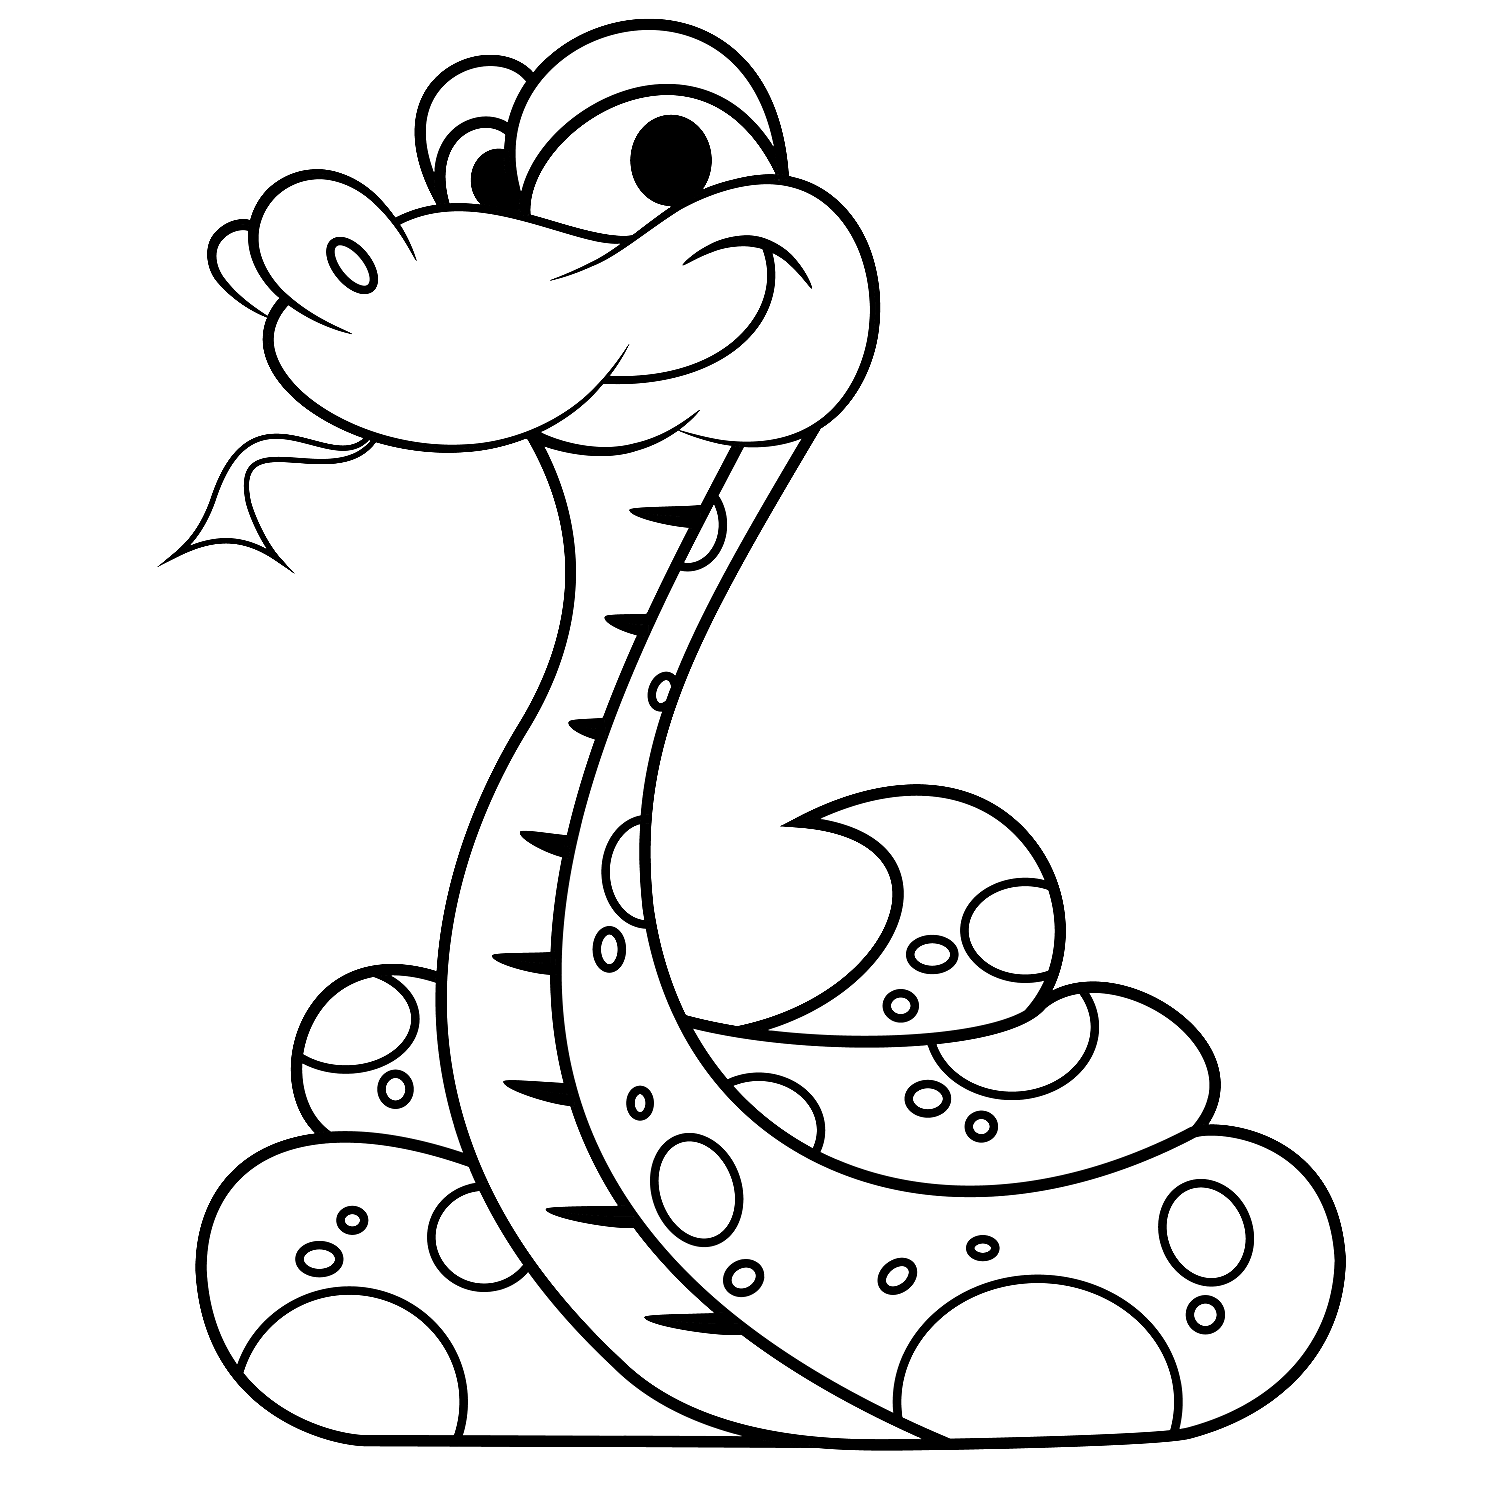 Snakes Coloring Pages To Print - High Quality Coloring Pages